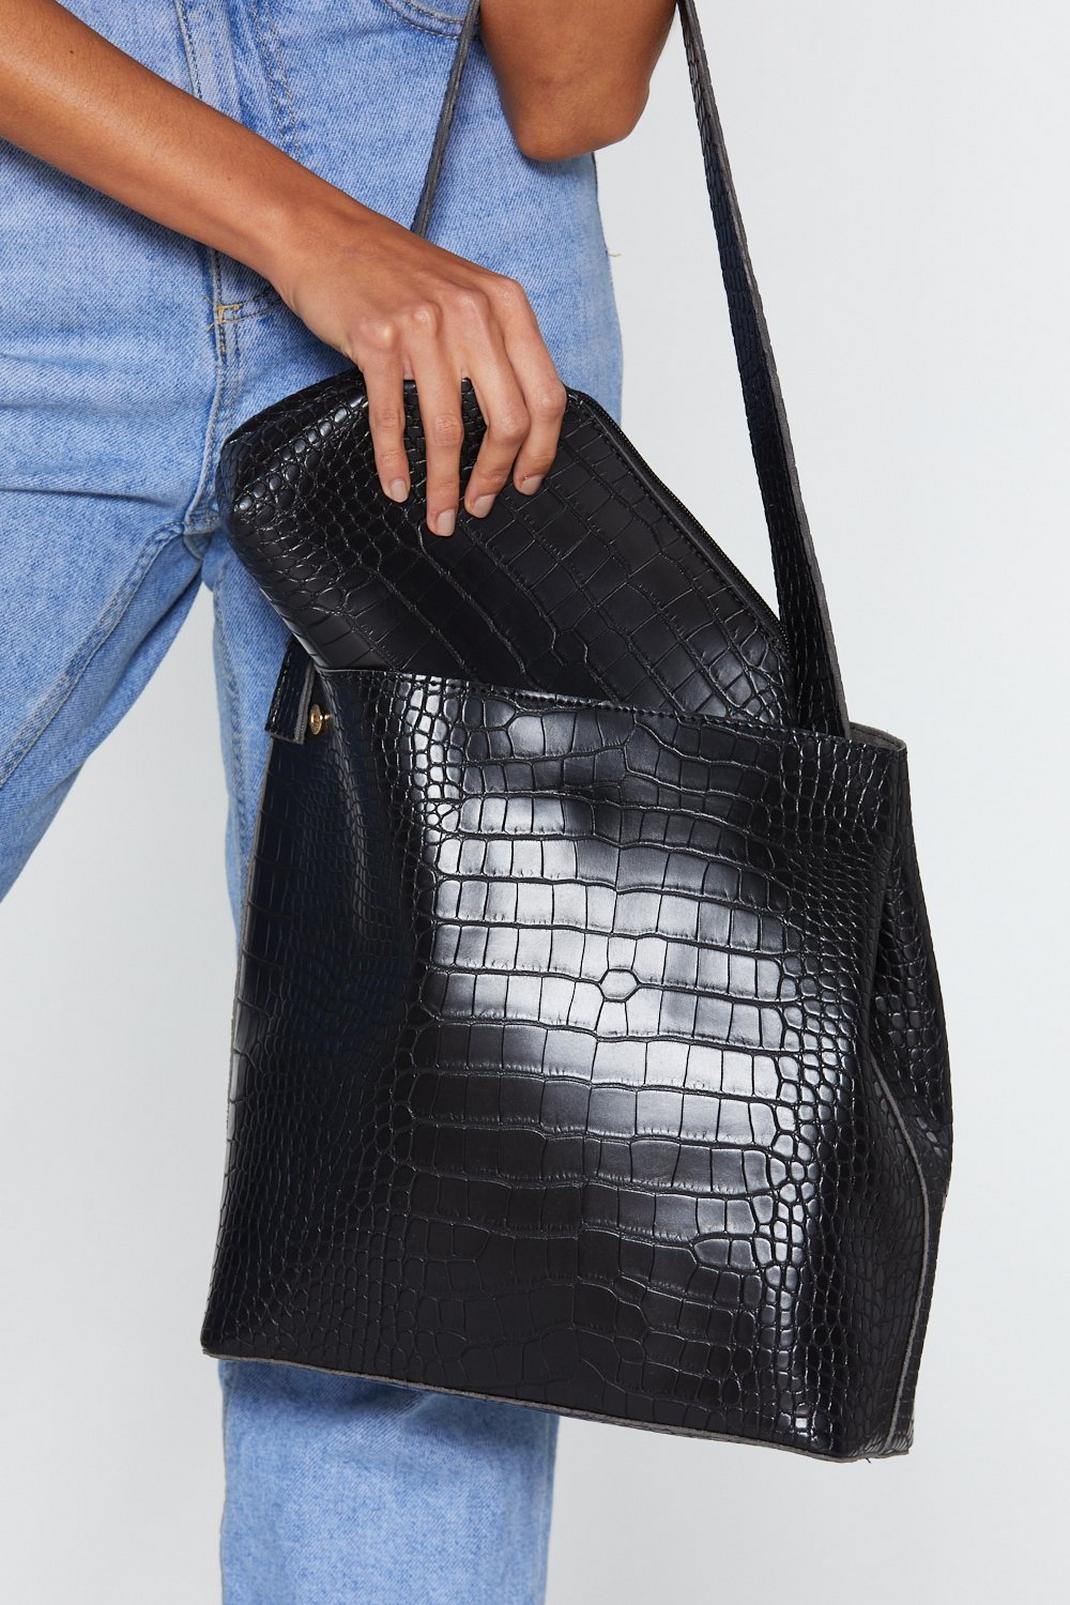 Faux Leather Croc Clutch and Tote Bag | Nasty Gal